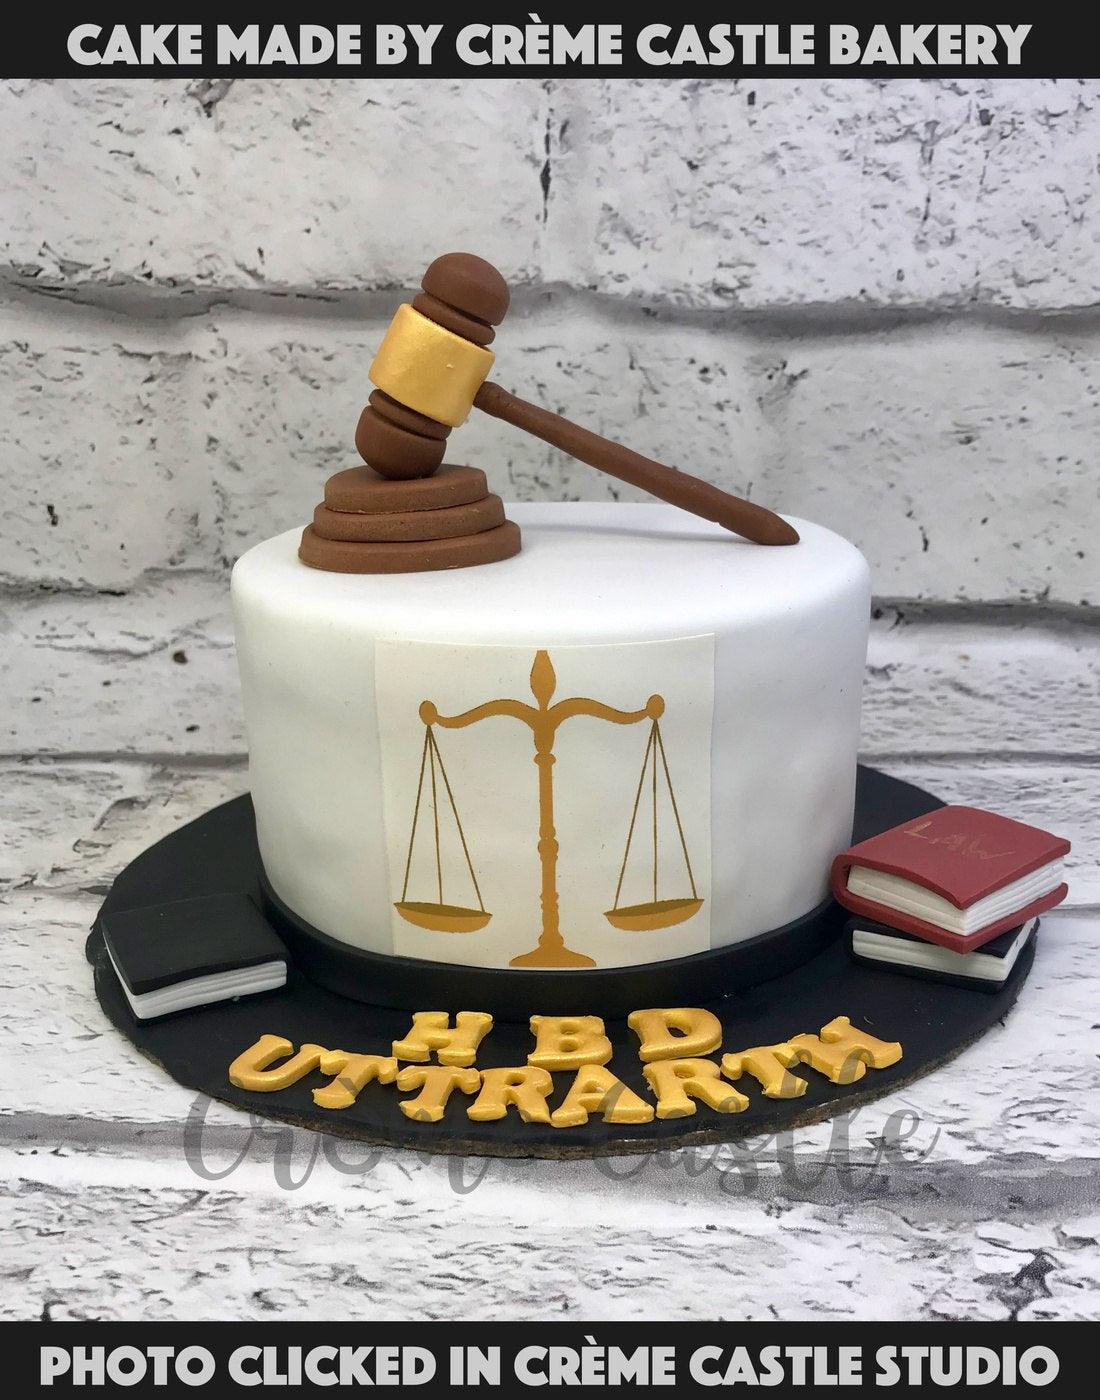 Law and Order Cake - Creme Castle